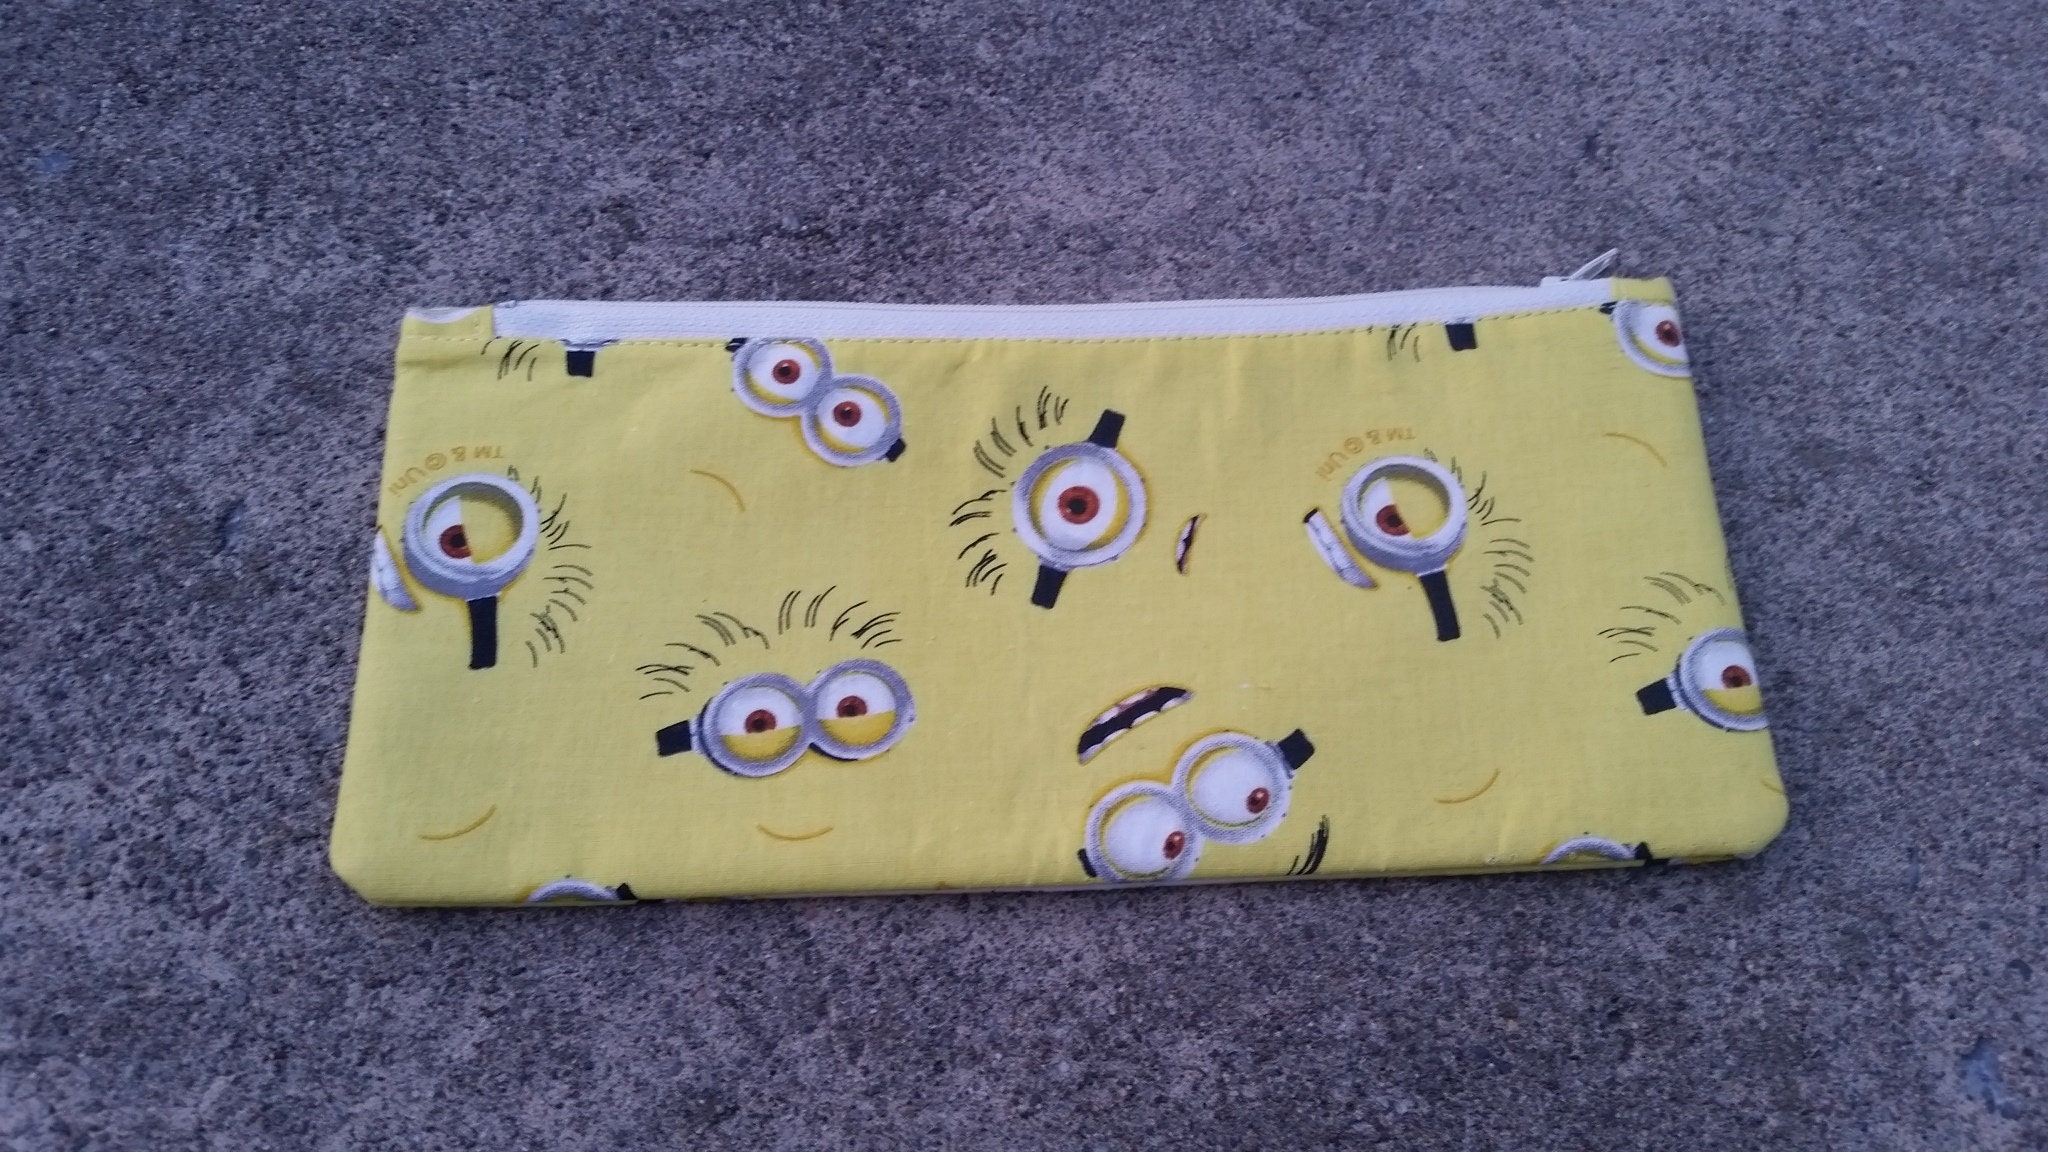 BACKPACK-Minion Backpack Pencil Pouch Back to School Bundle